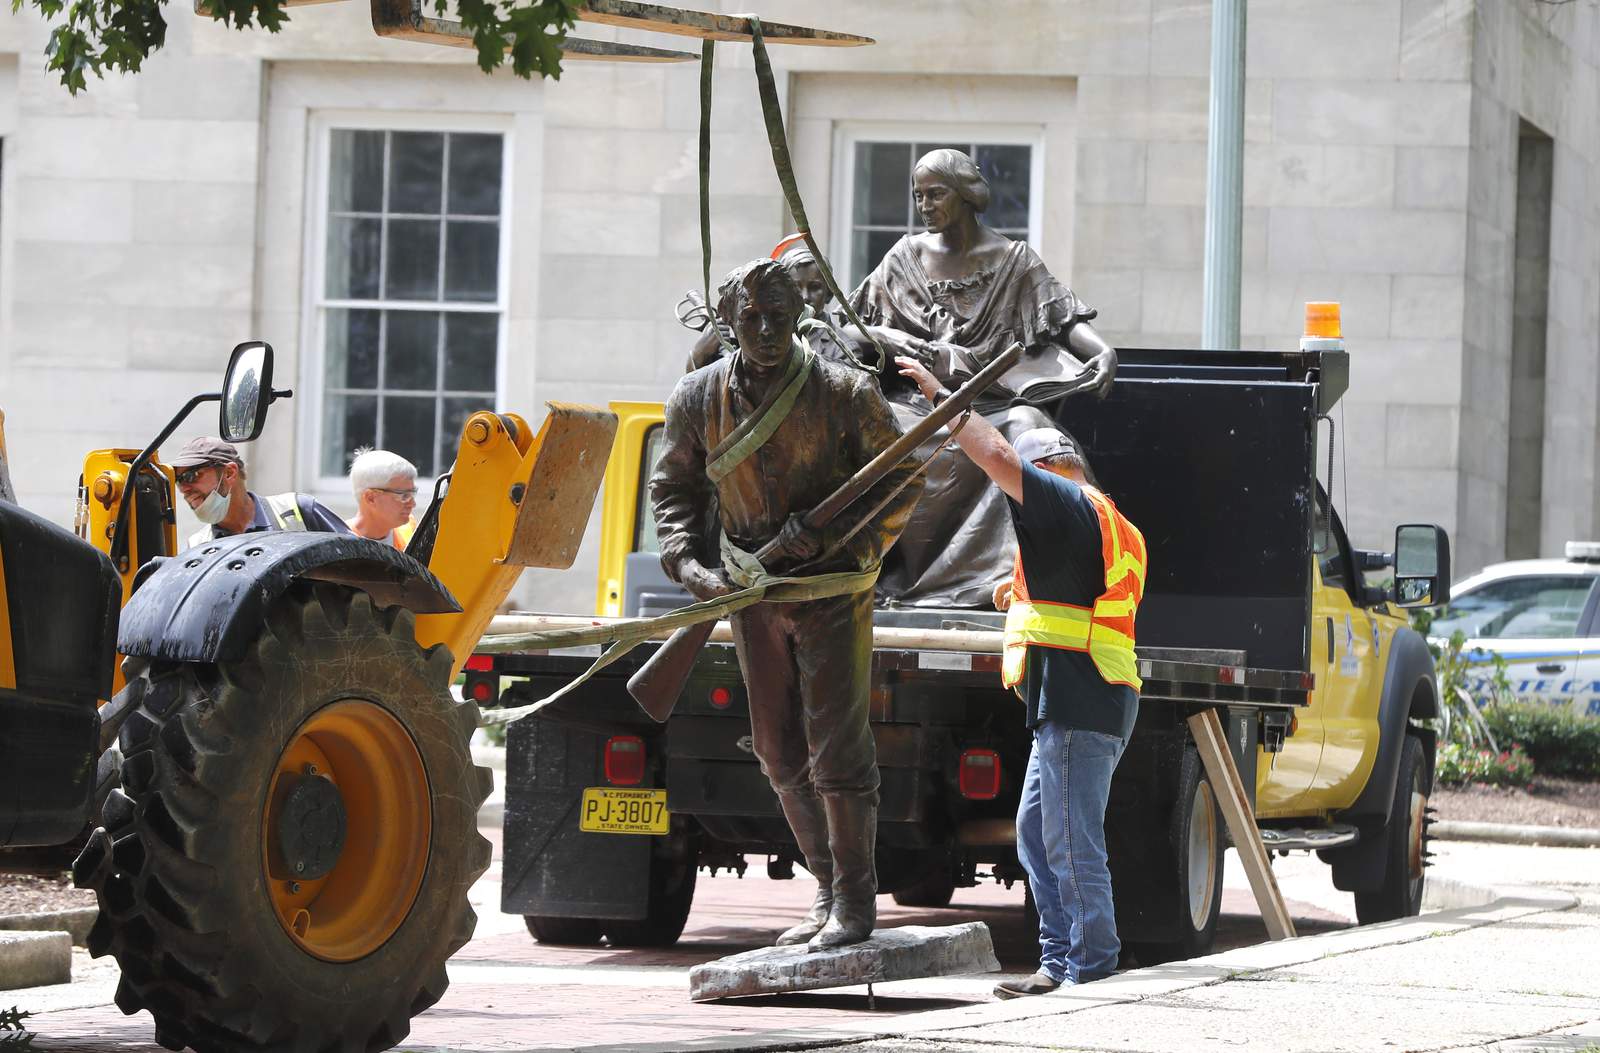 Statues toppled throughout US in protests against racism